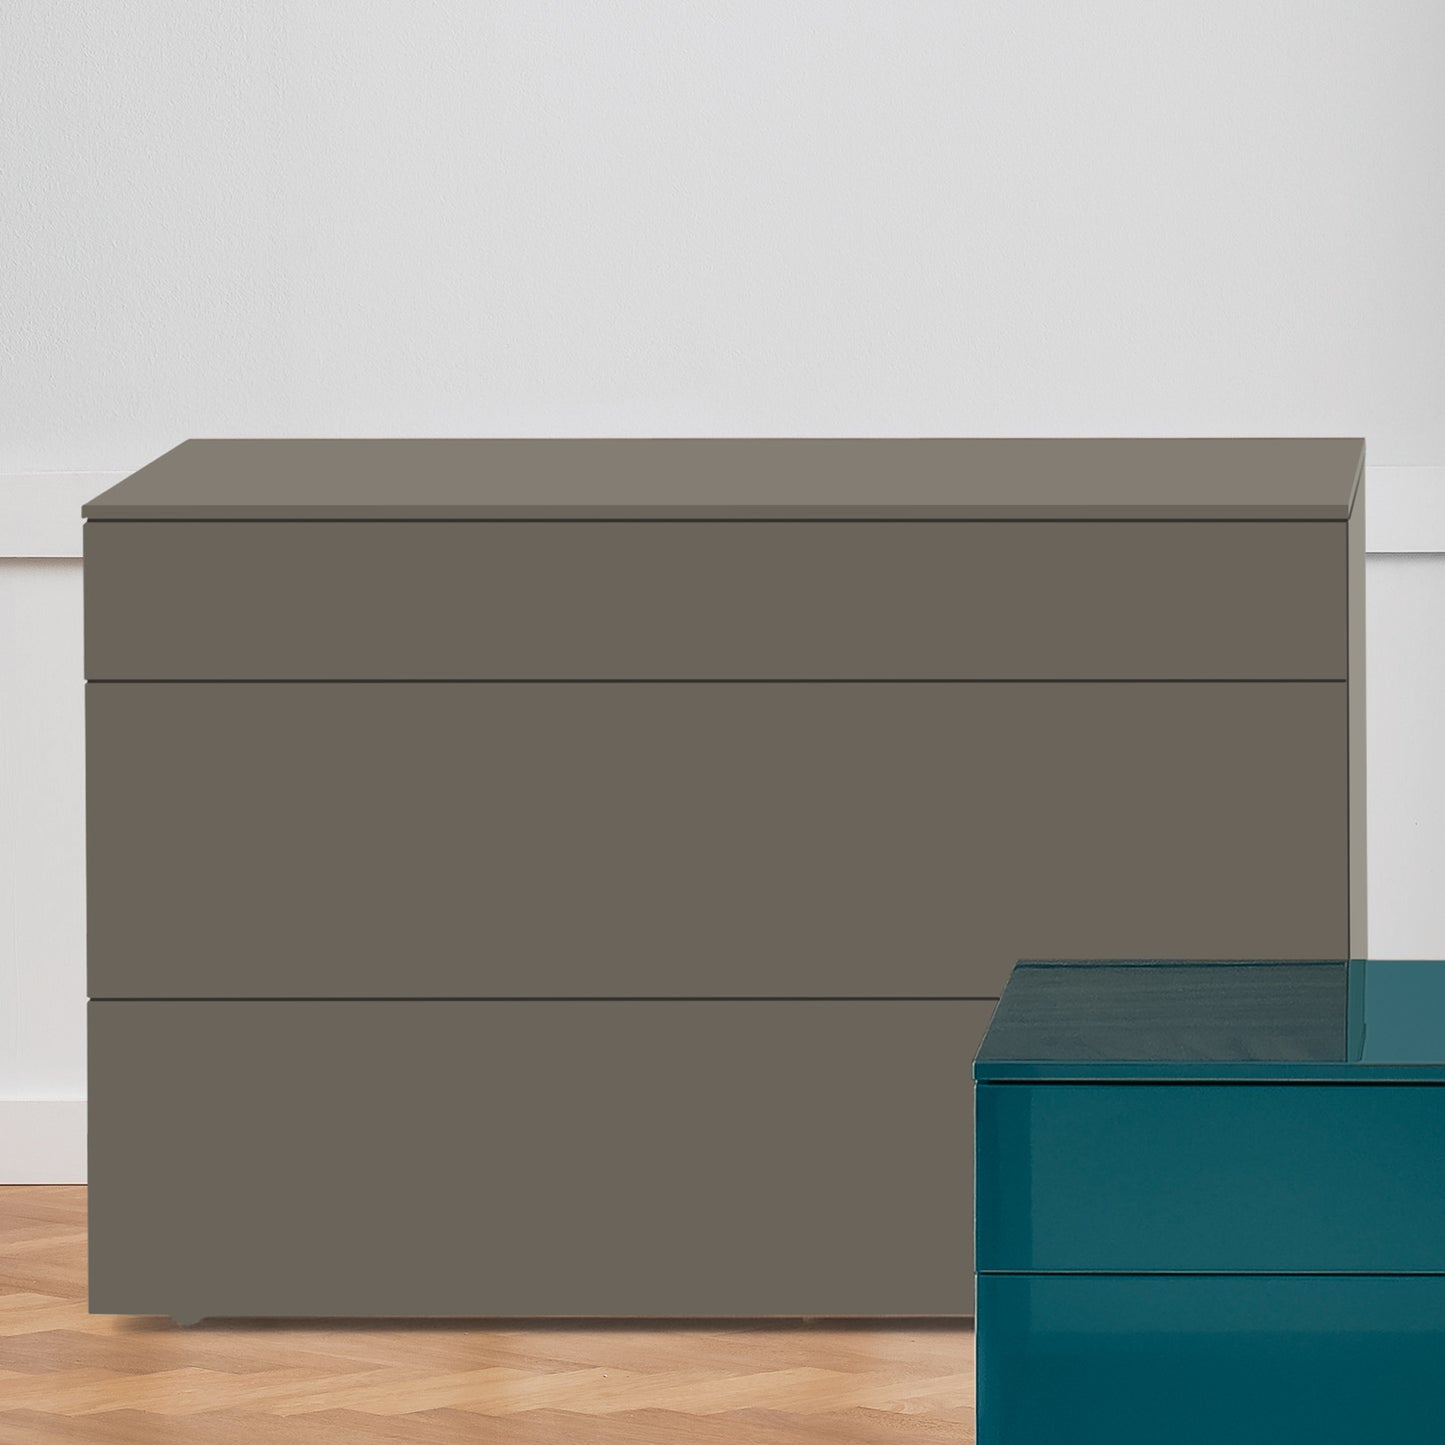 Slim Chest of Drawers By Dall'Agnese